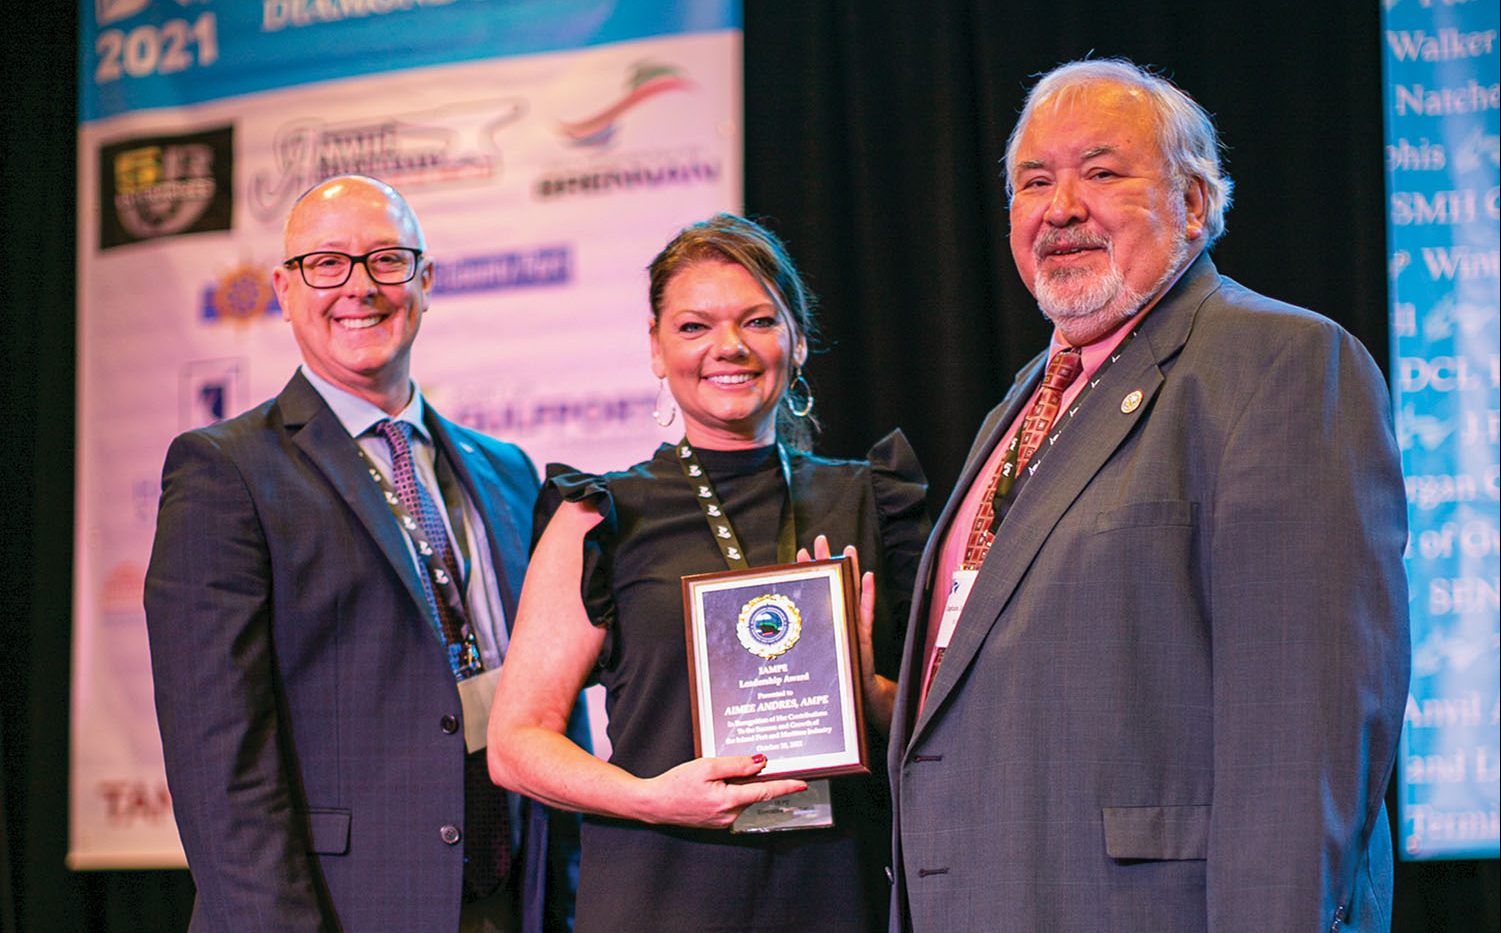 Pictured are Dr. Donald Maier, dean of Maritime Transportation, Logistics and Management at California State Maritime University, Aimee Andres and Capt. Jeffrey Monroe presenting the award at the recent annual IRPT Conference in Biloxi, Miss.